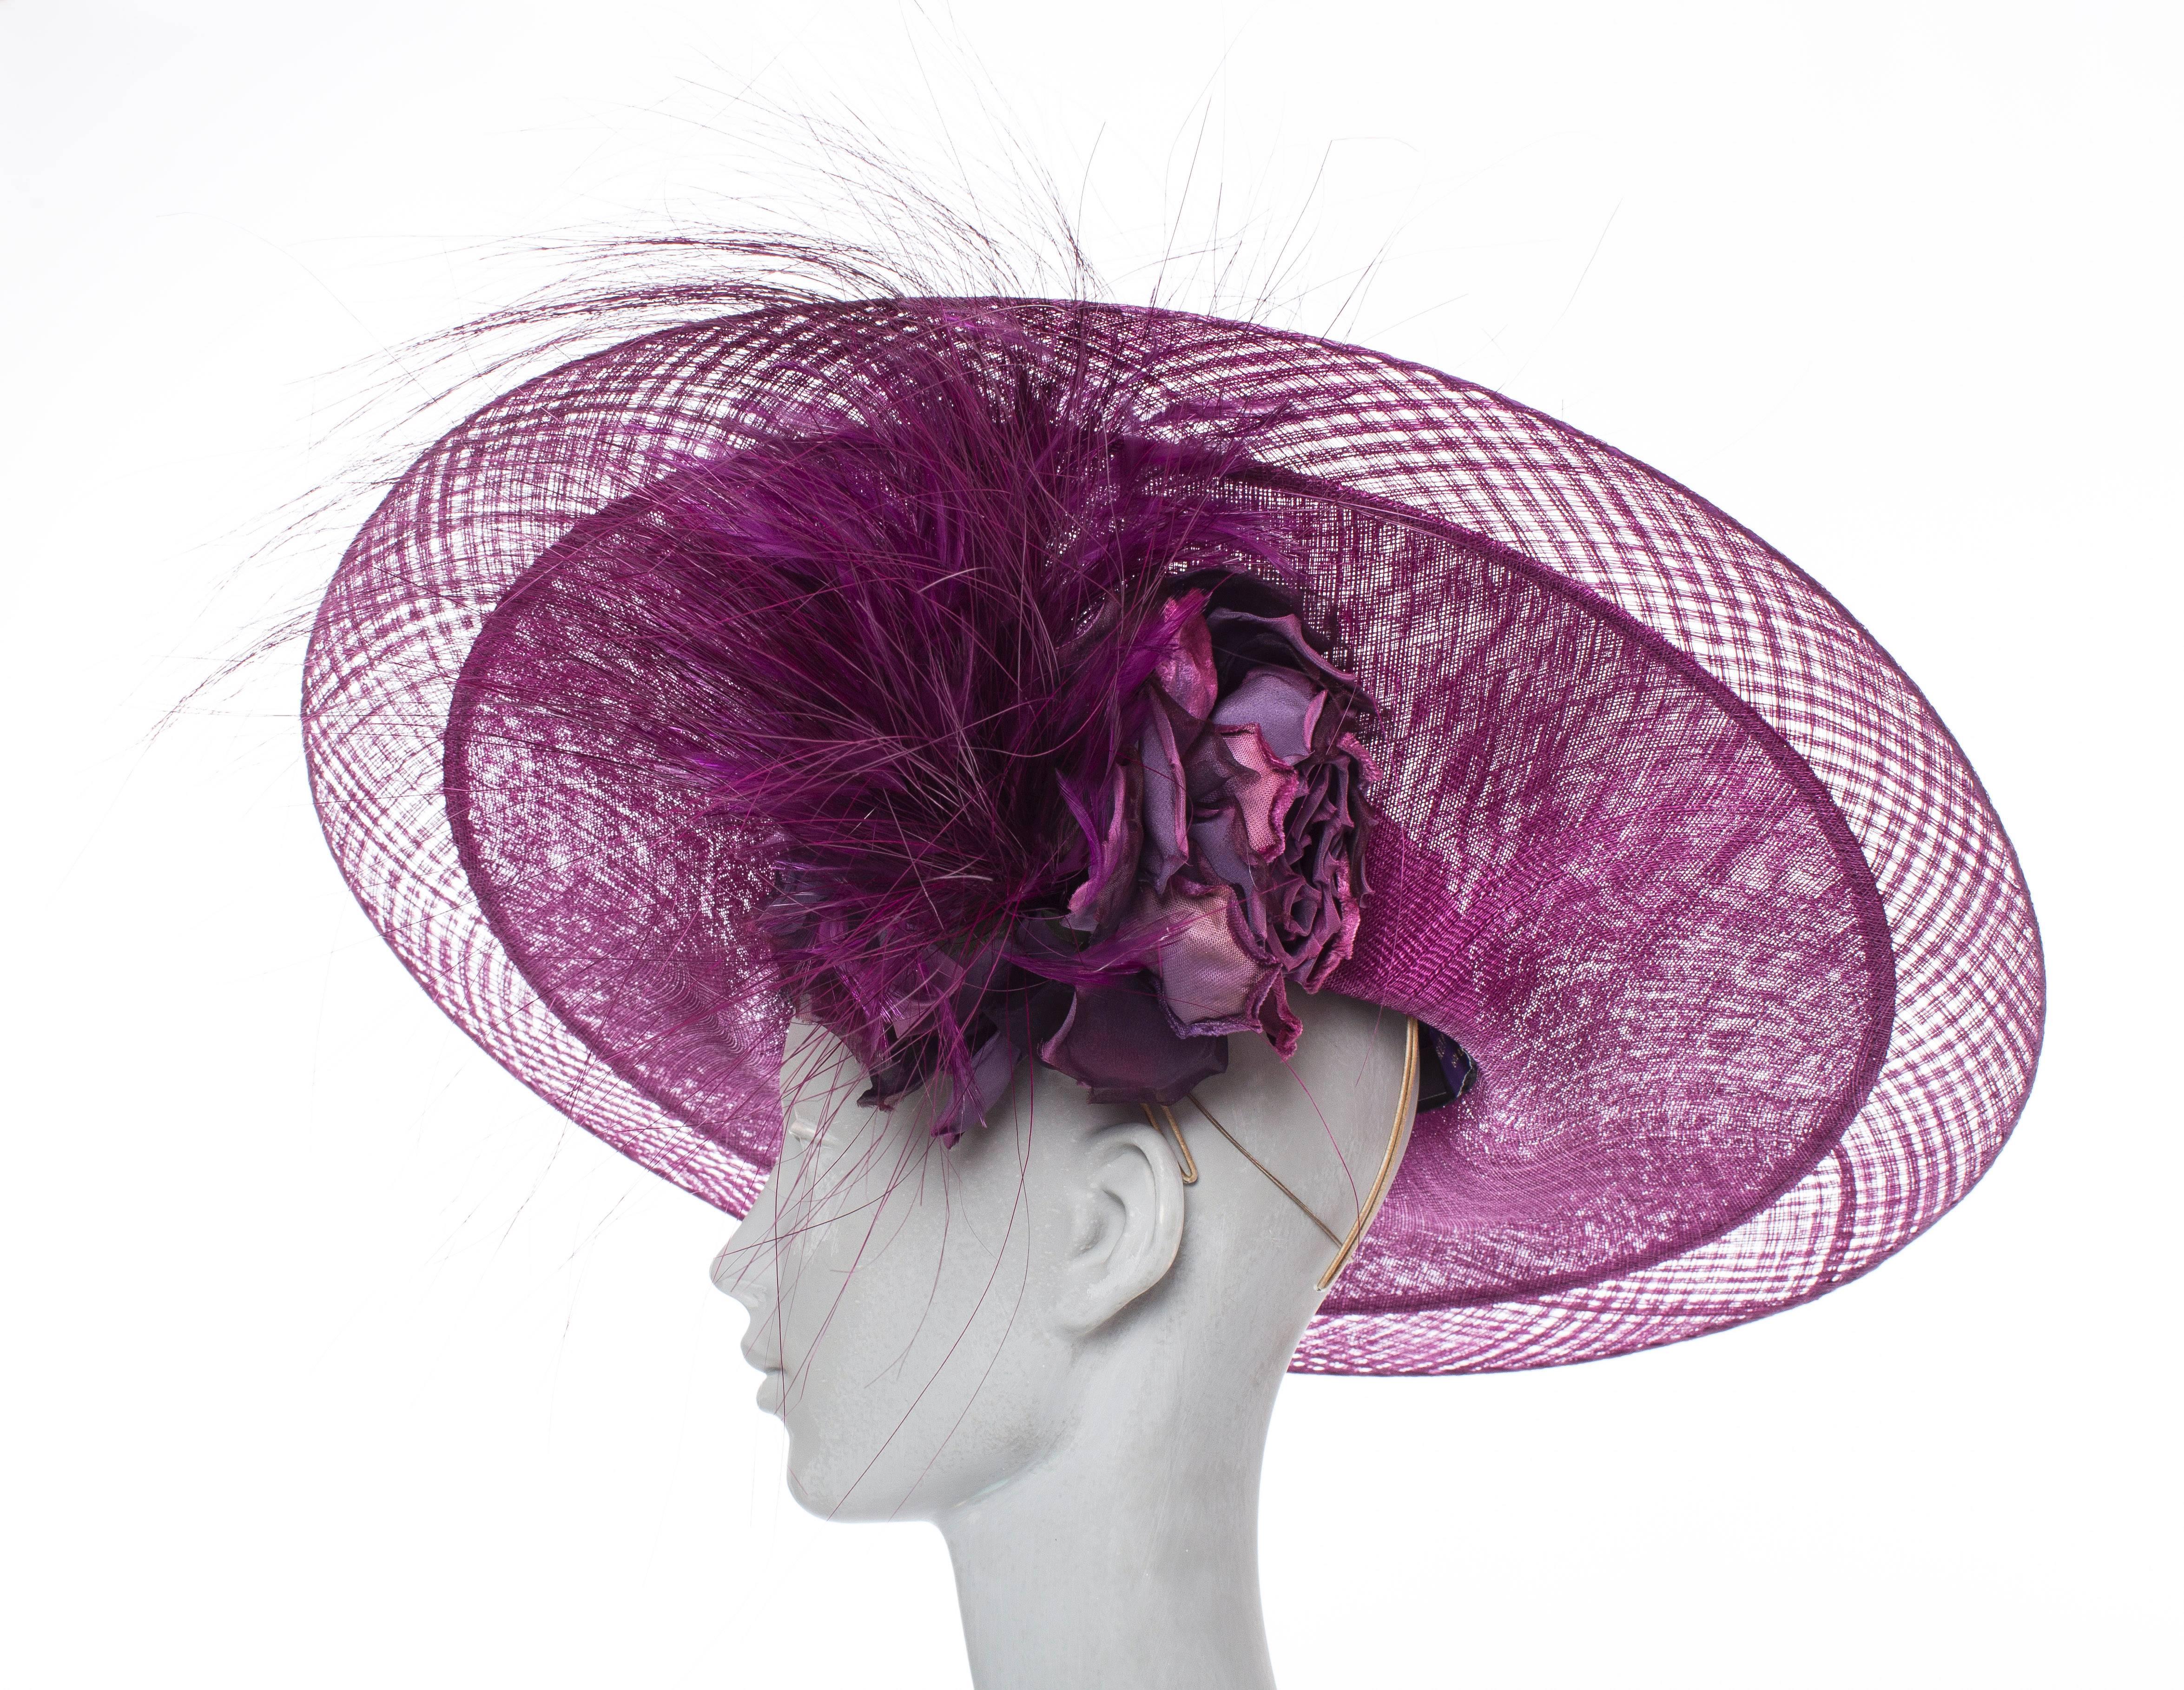 Philip Treacy sinamay side slice hat with feather and floral adornment at side and Includes box.

Circumference 20”, Brim 6.5”